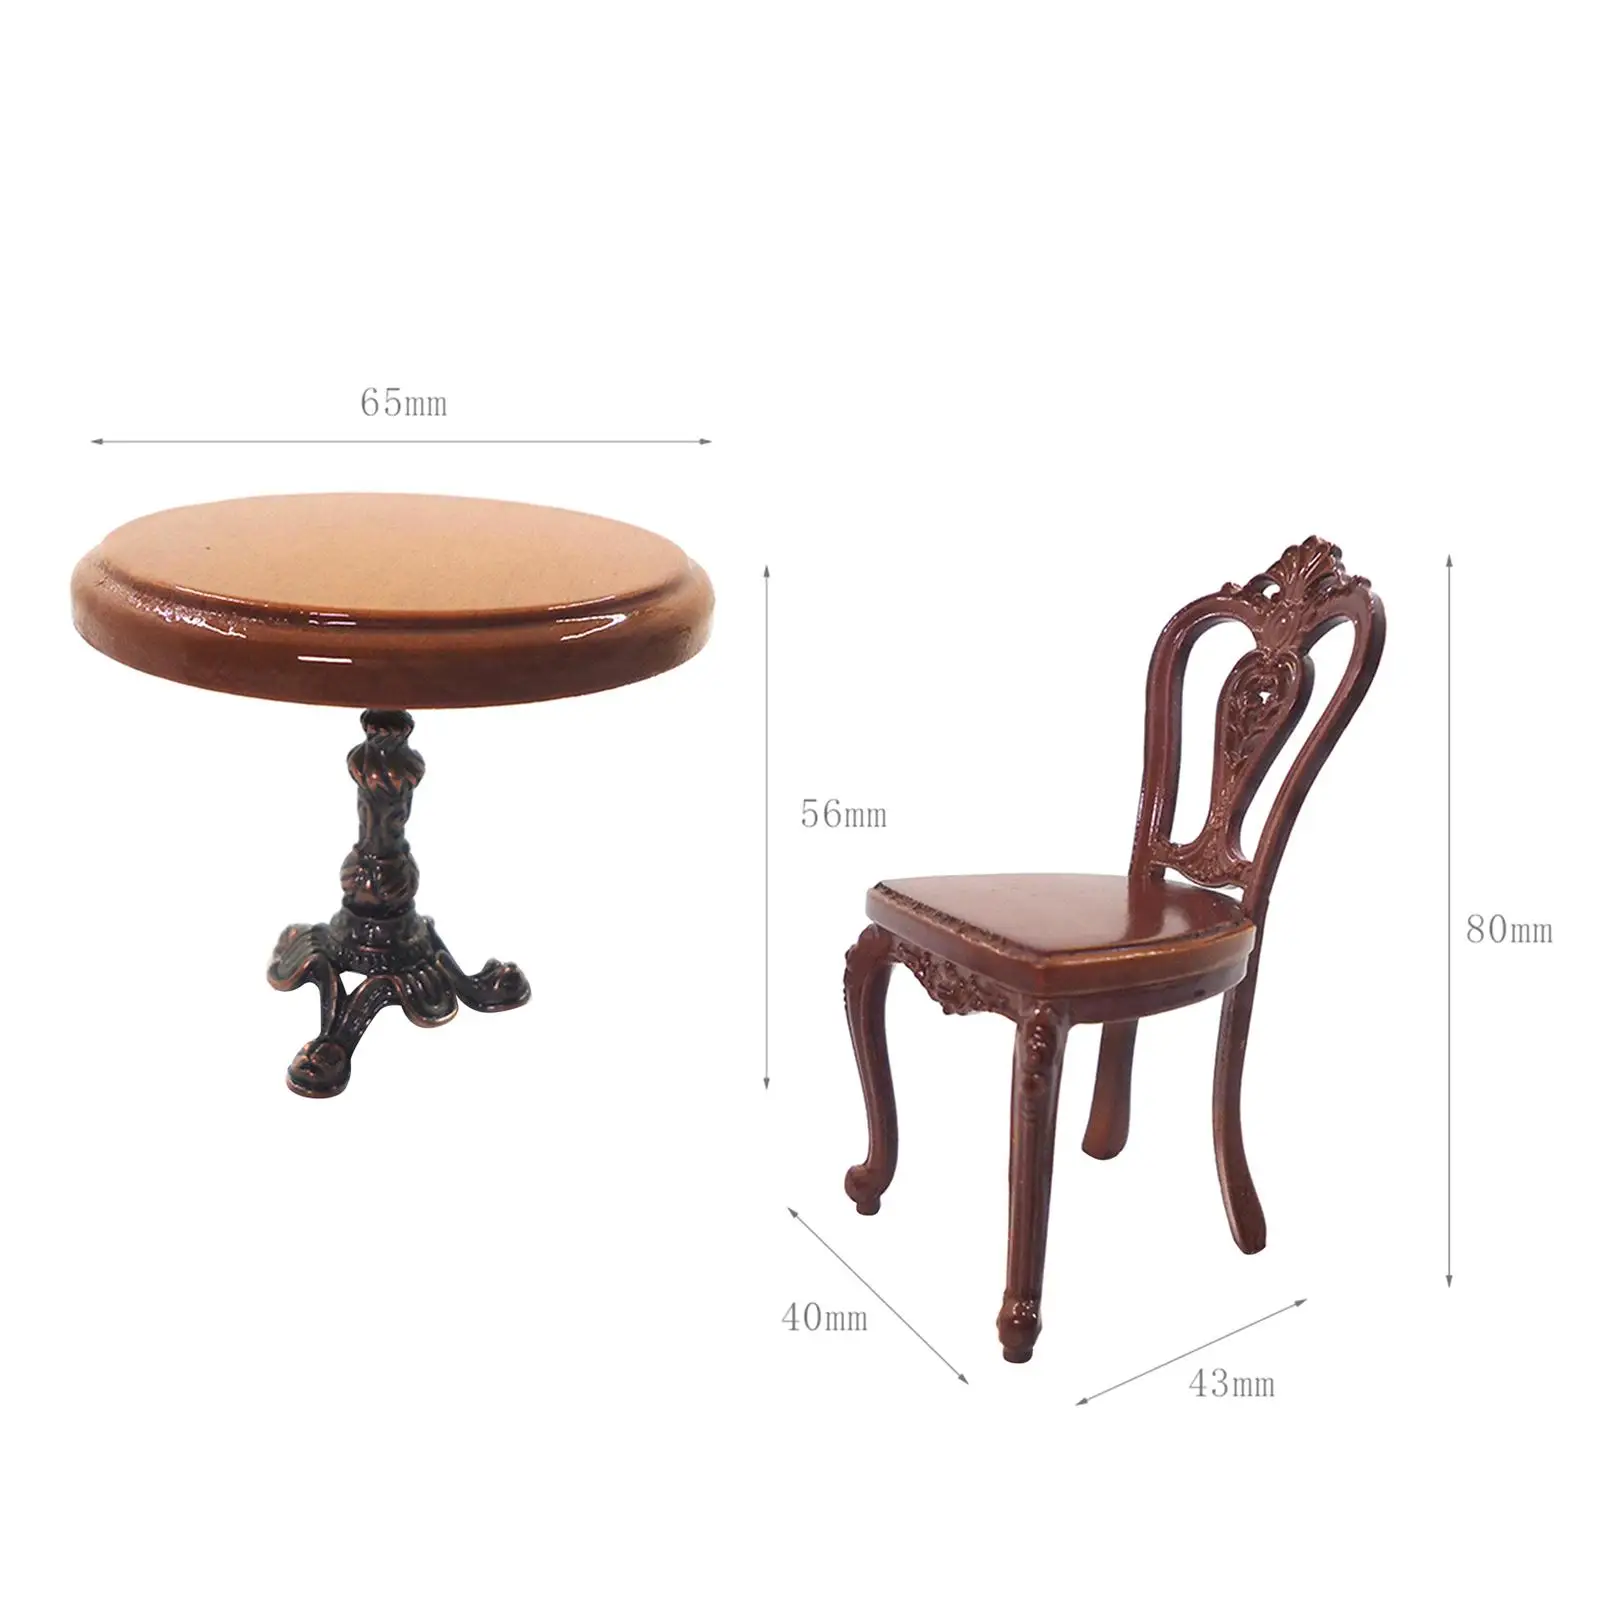 3x Wooden Round Table and Chairs Model Living Room Kitchen Home Ornaments